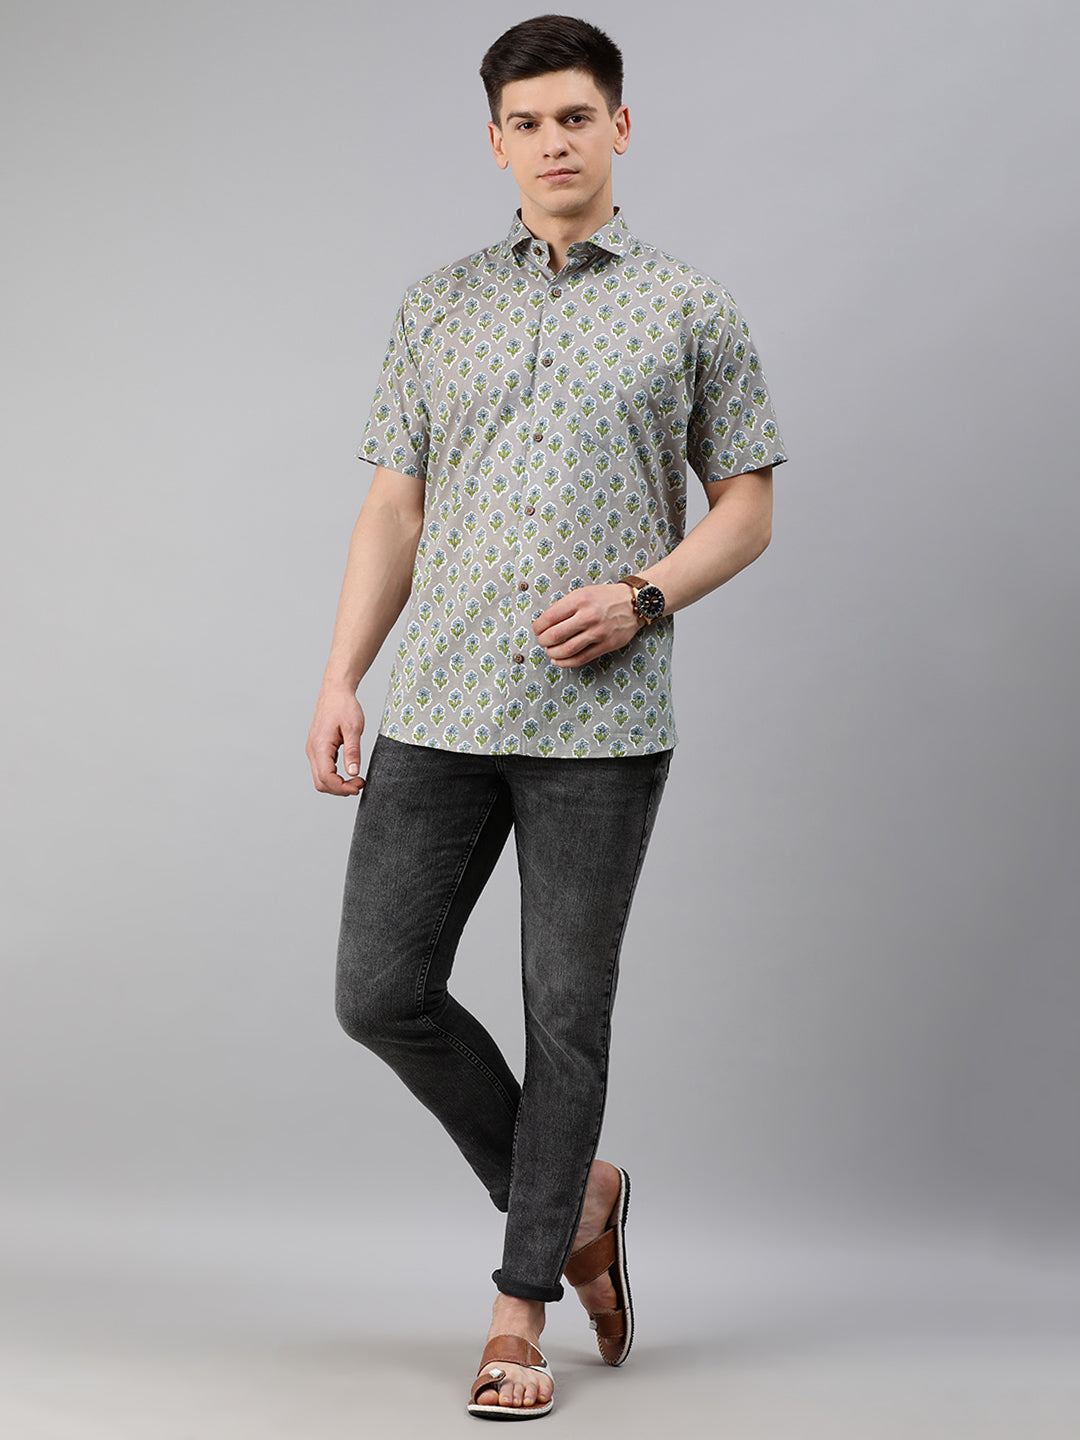 Grey Cotton Short Sleeves Shirts For Men